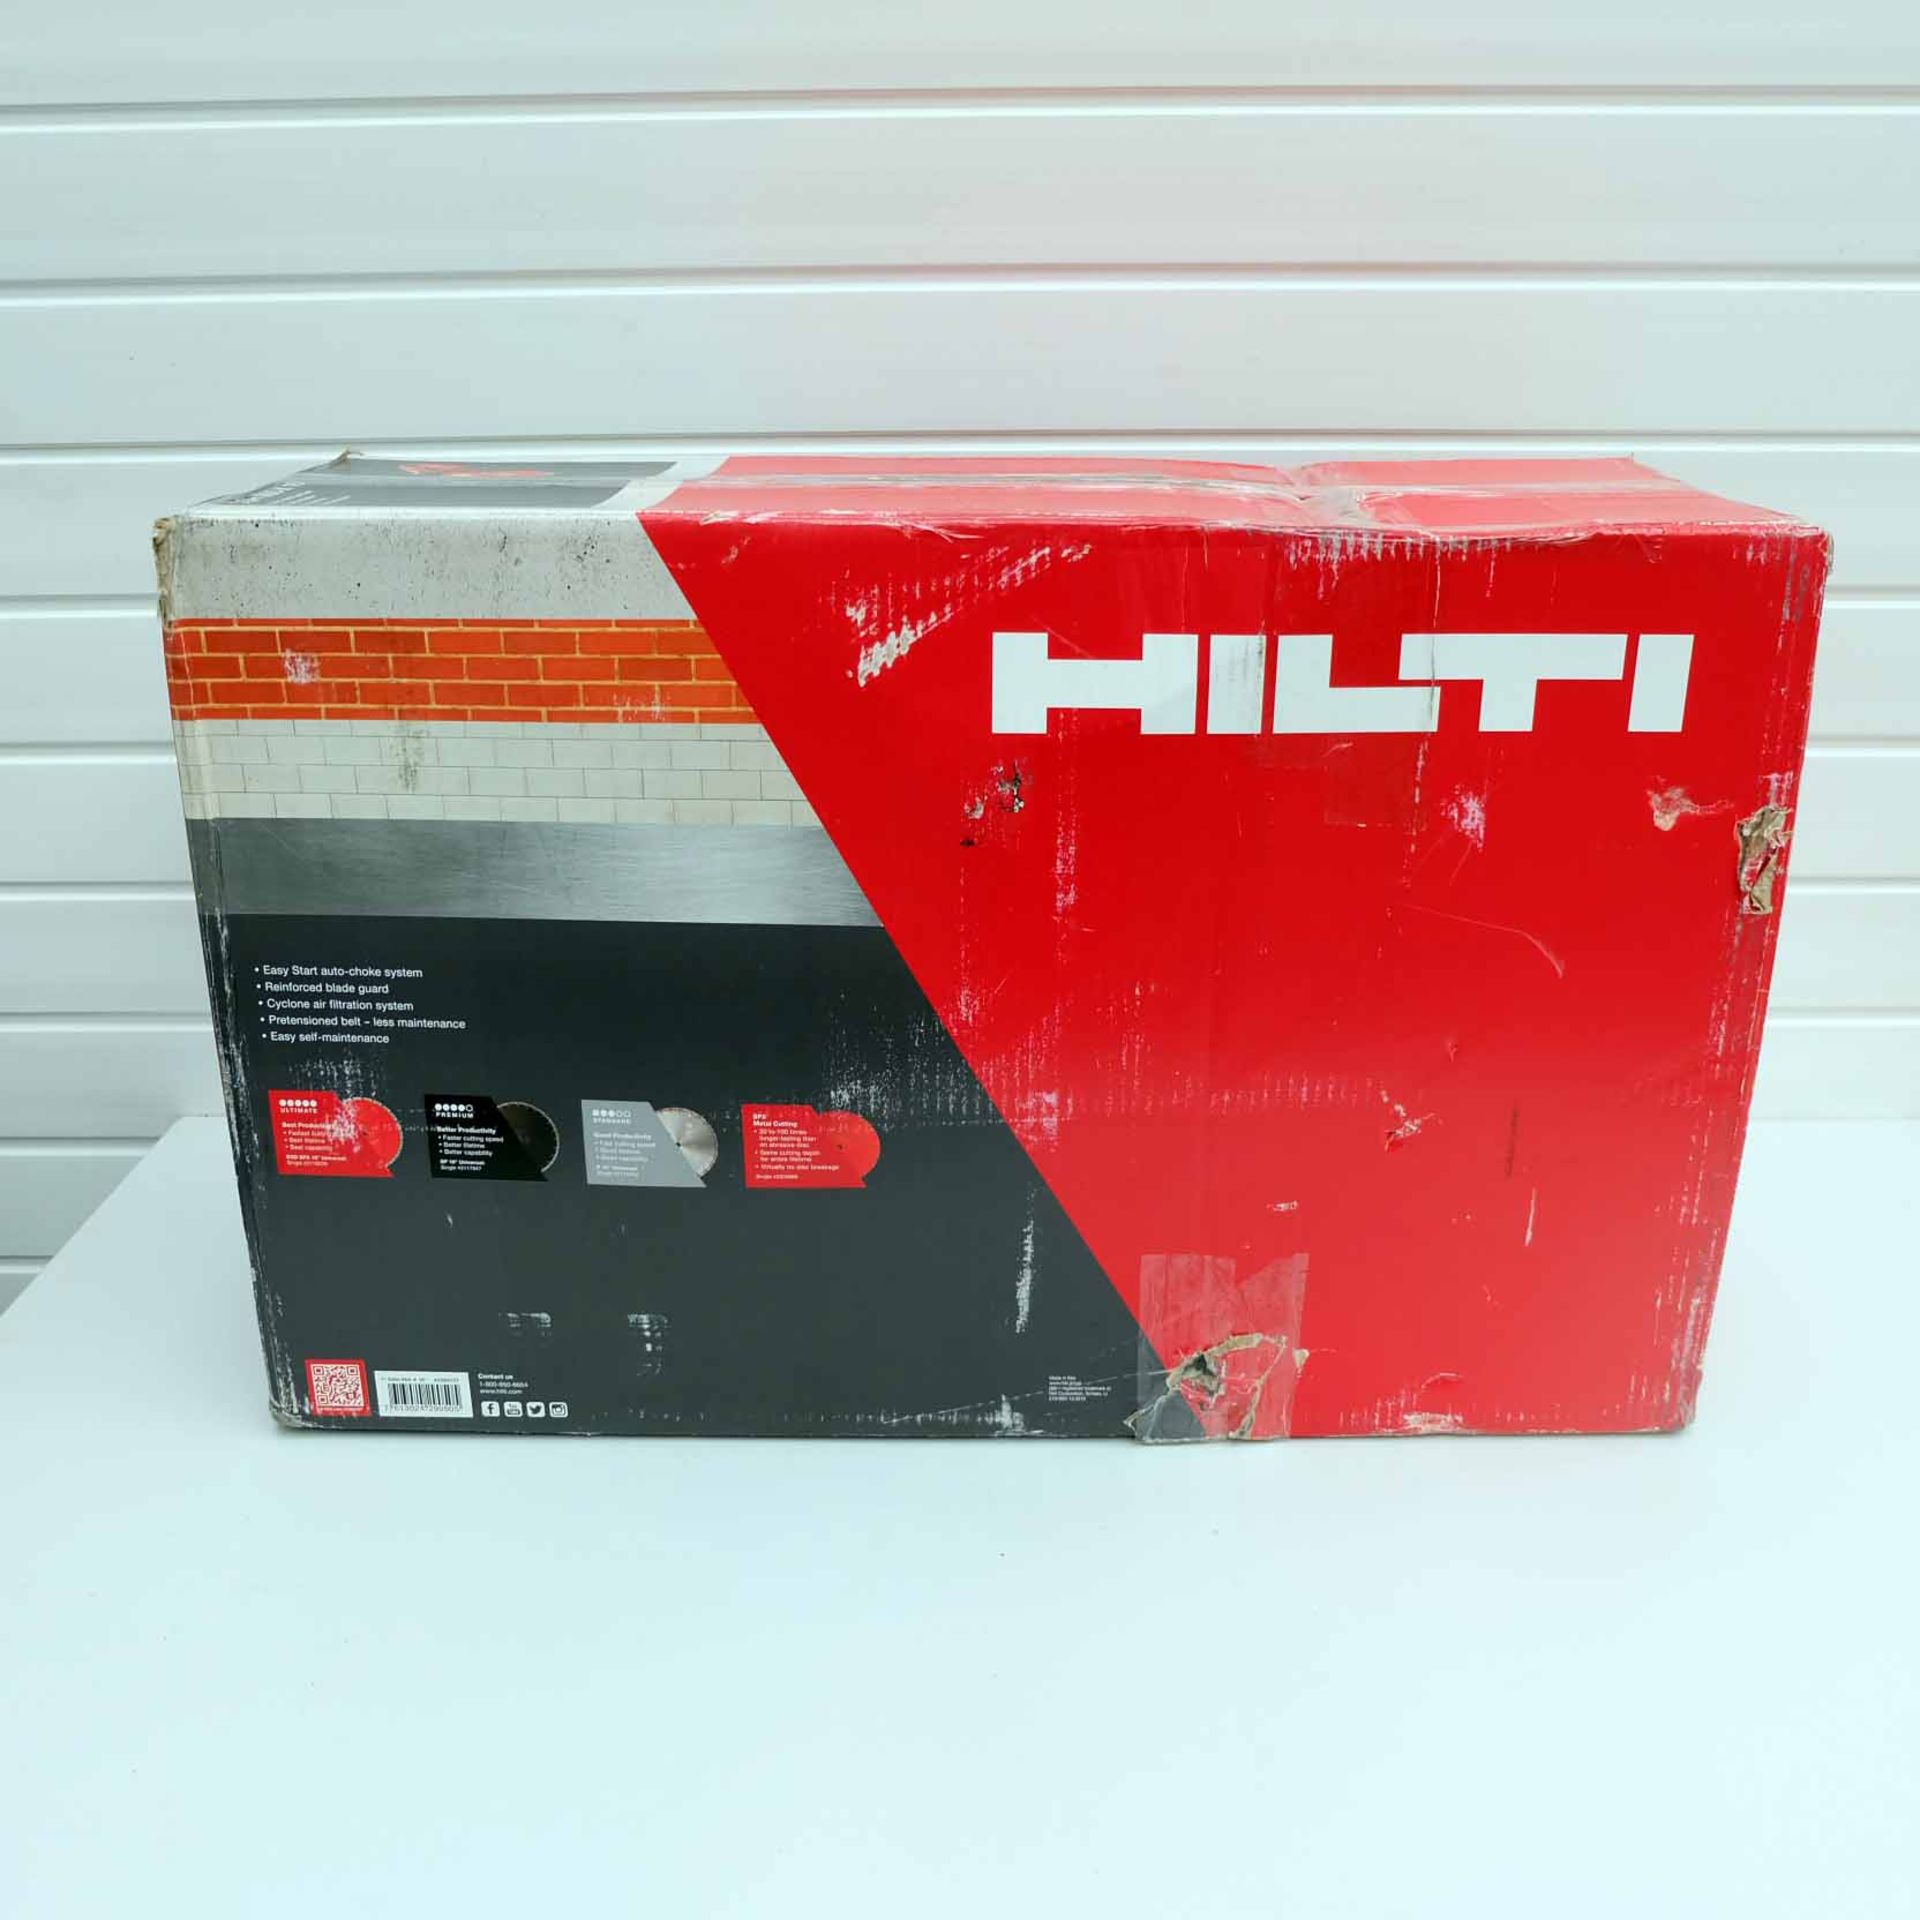 Hilti Hand Held Gas Saw. Model DSH 900-X 16". Complete With SP-16"x1" Blade. Easy Start Auto-Choke S - Image 21 of 22